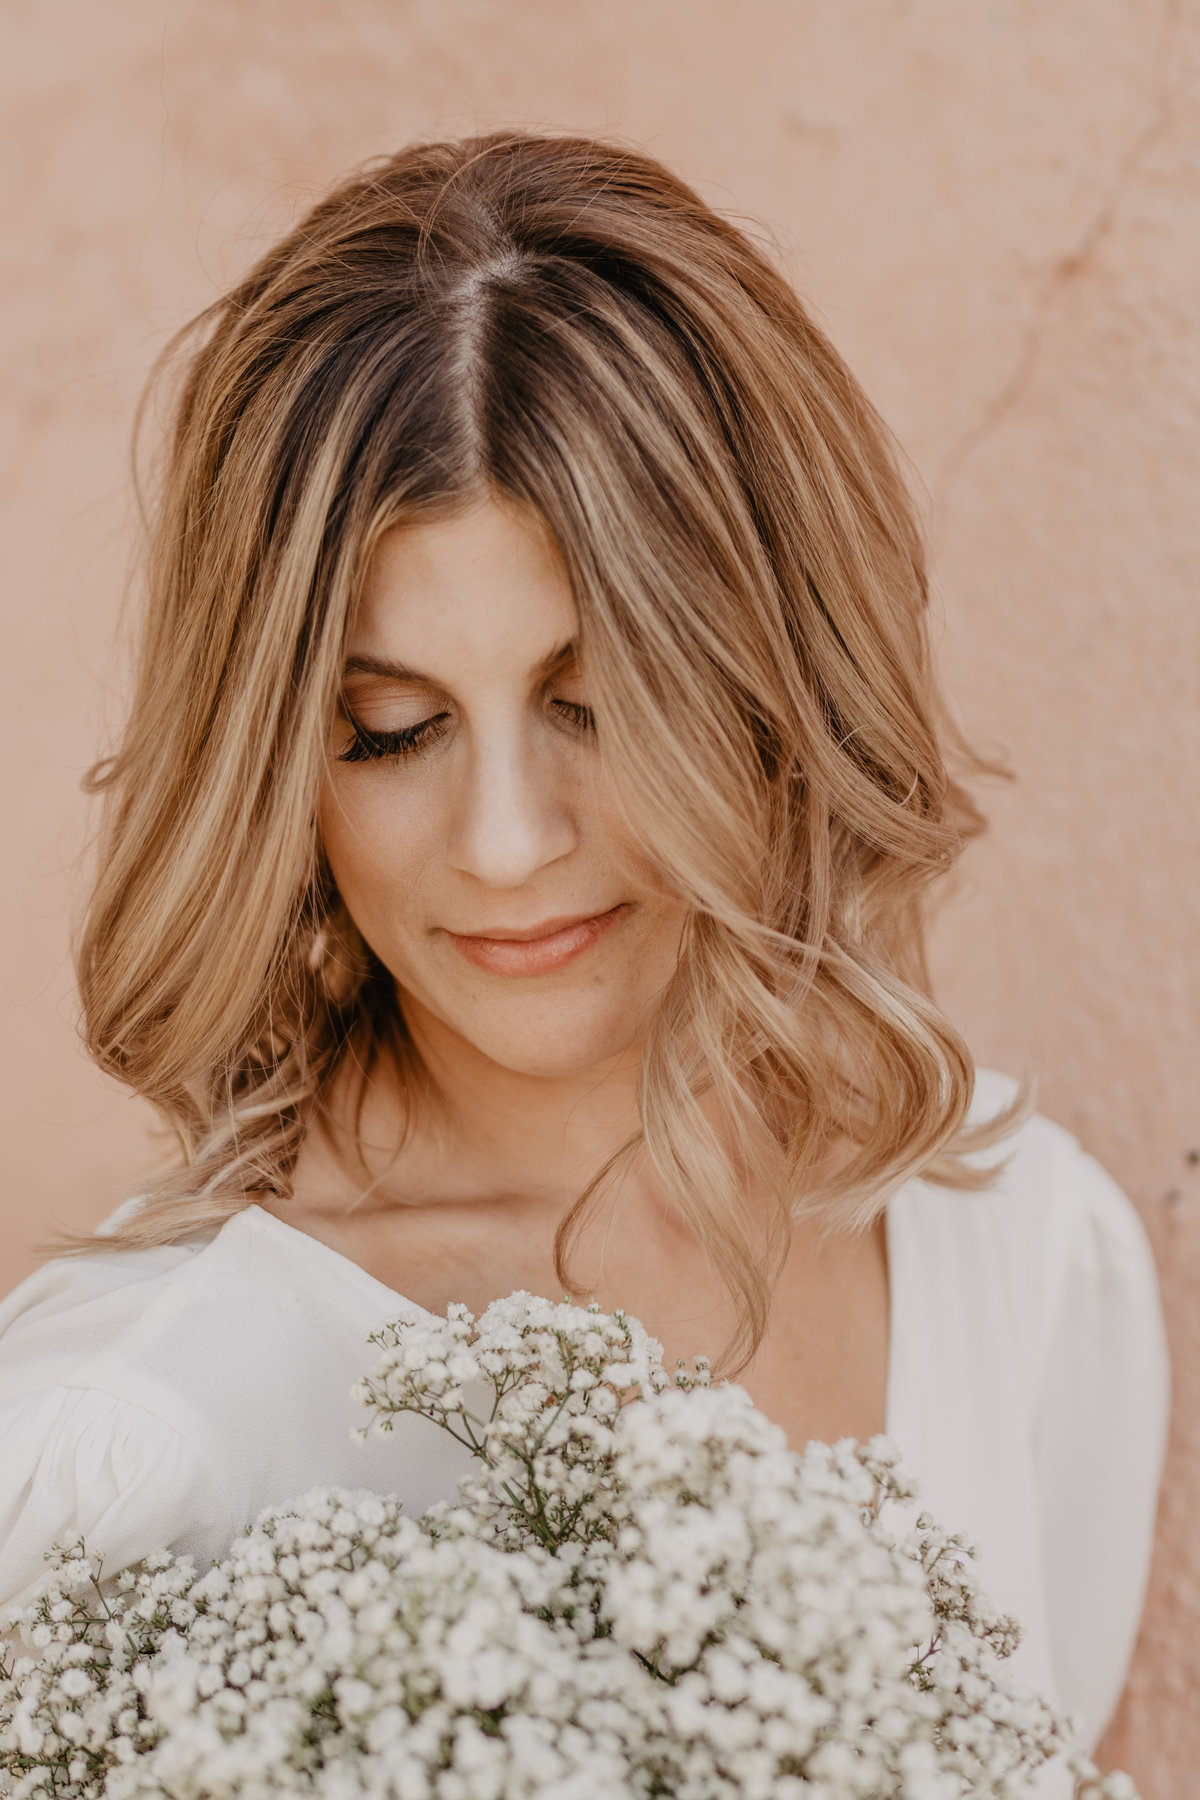 jackson wyoming photographer captures beautiful bride in a white sleeved dress looking down at her all white wedding bouquet for her grand teton wedding